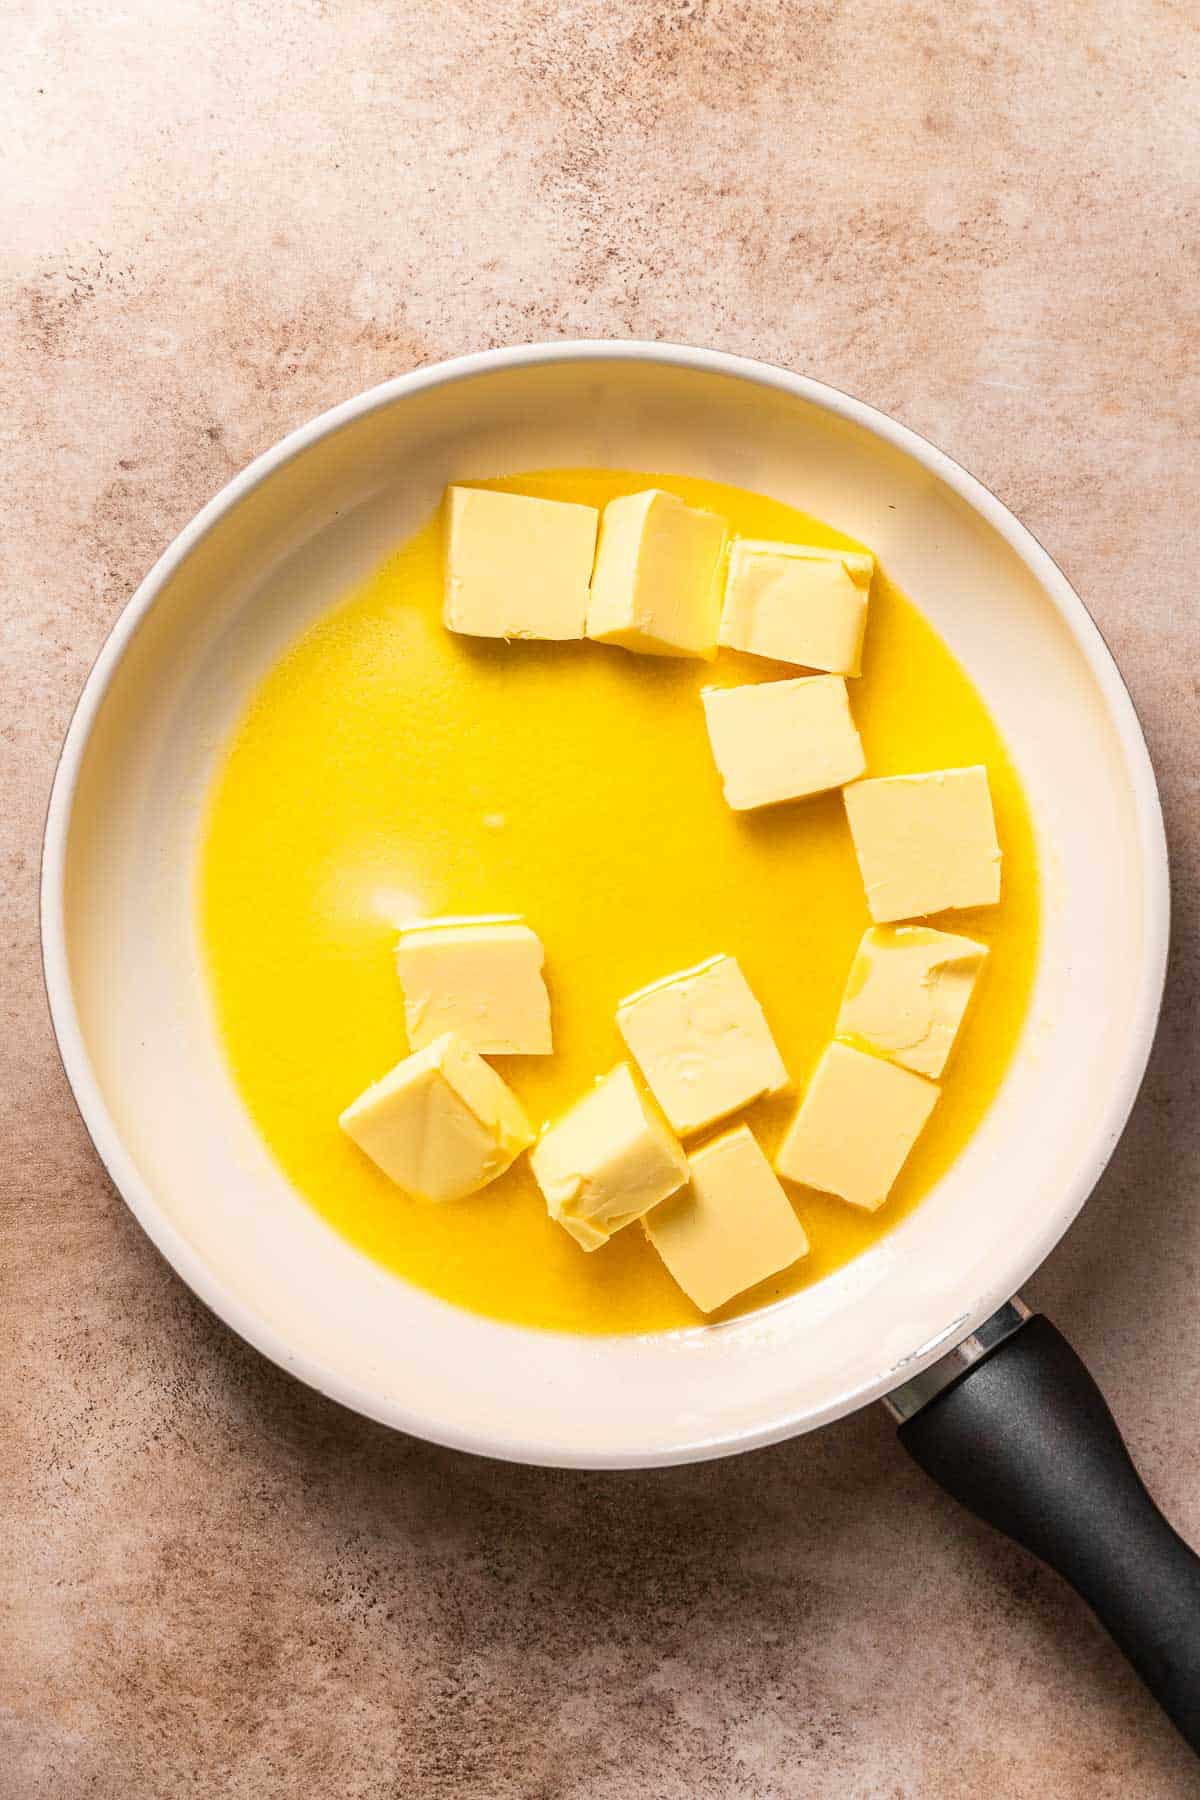 A white pan with butter slices half melted.